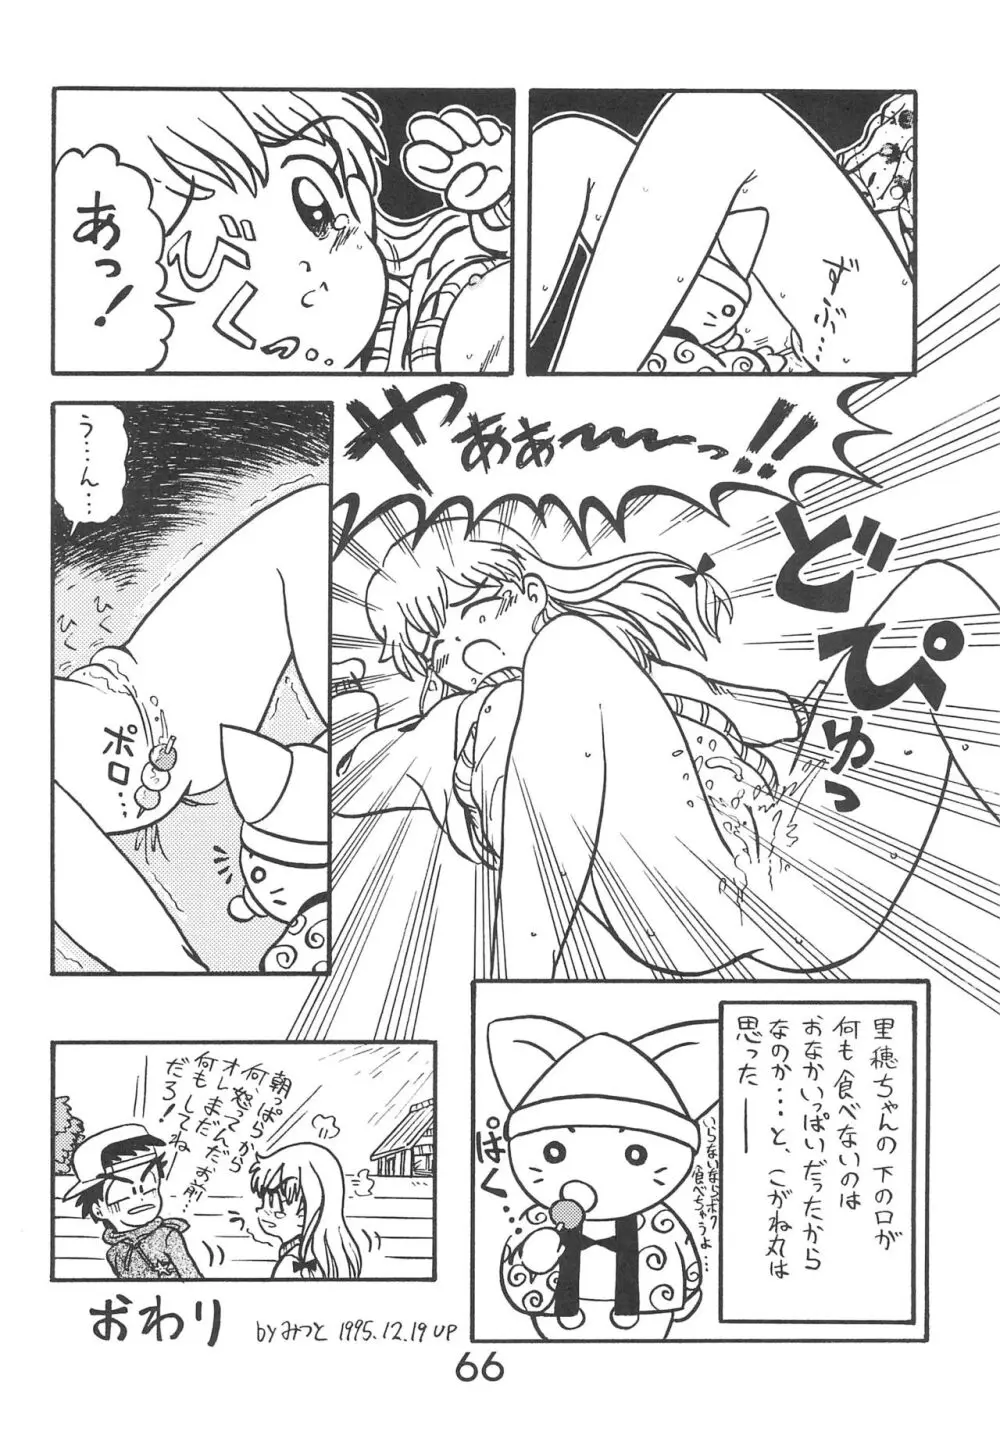 Fun House 9th Chame! - page66